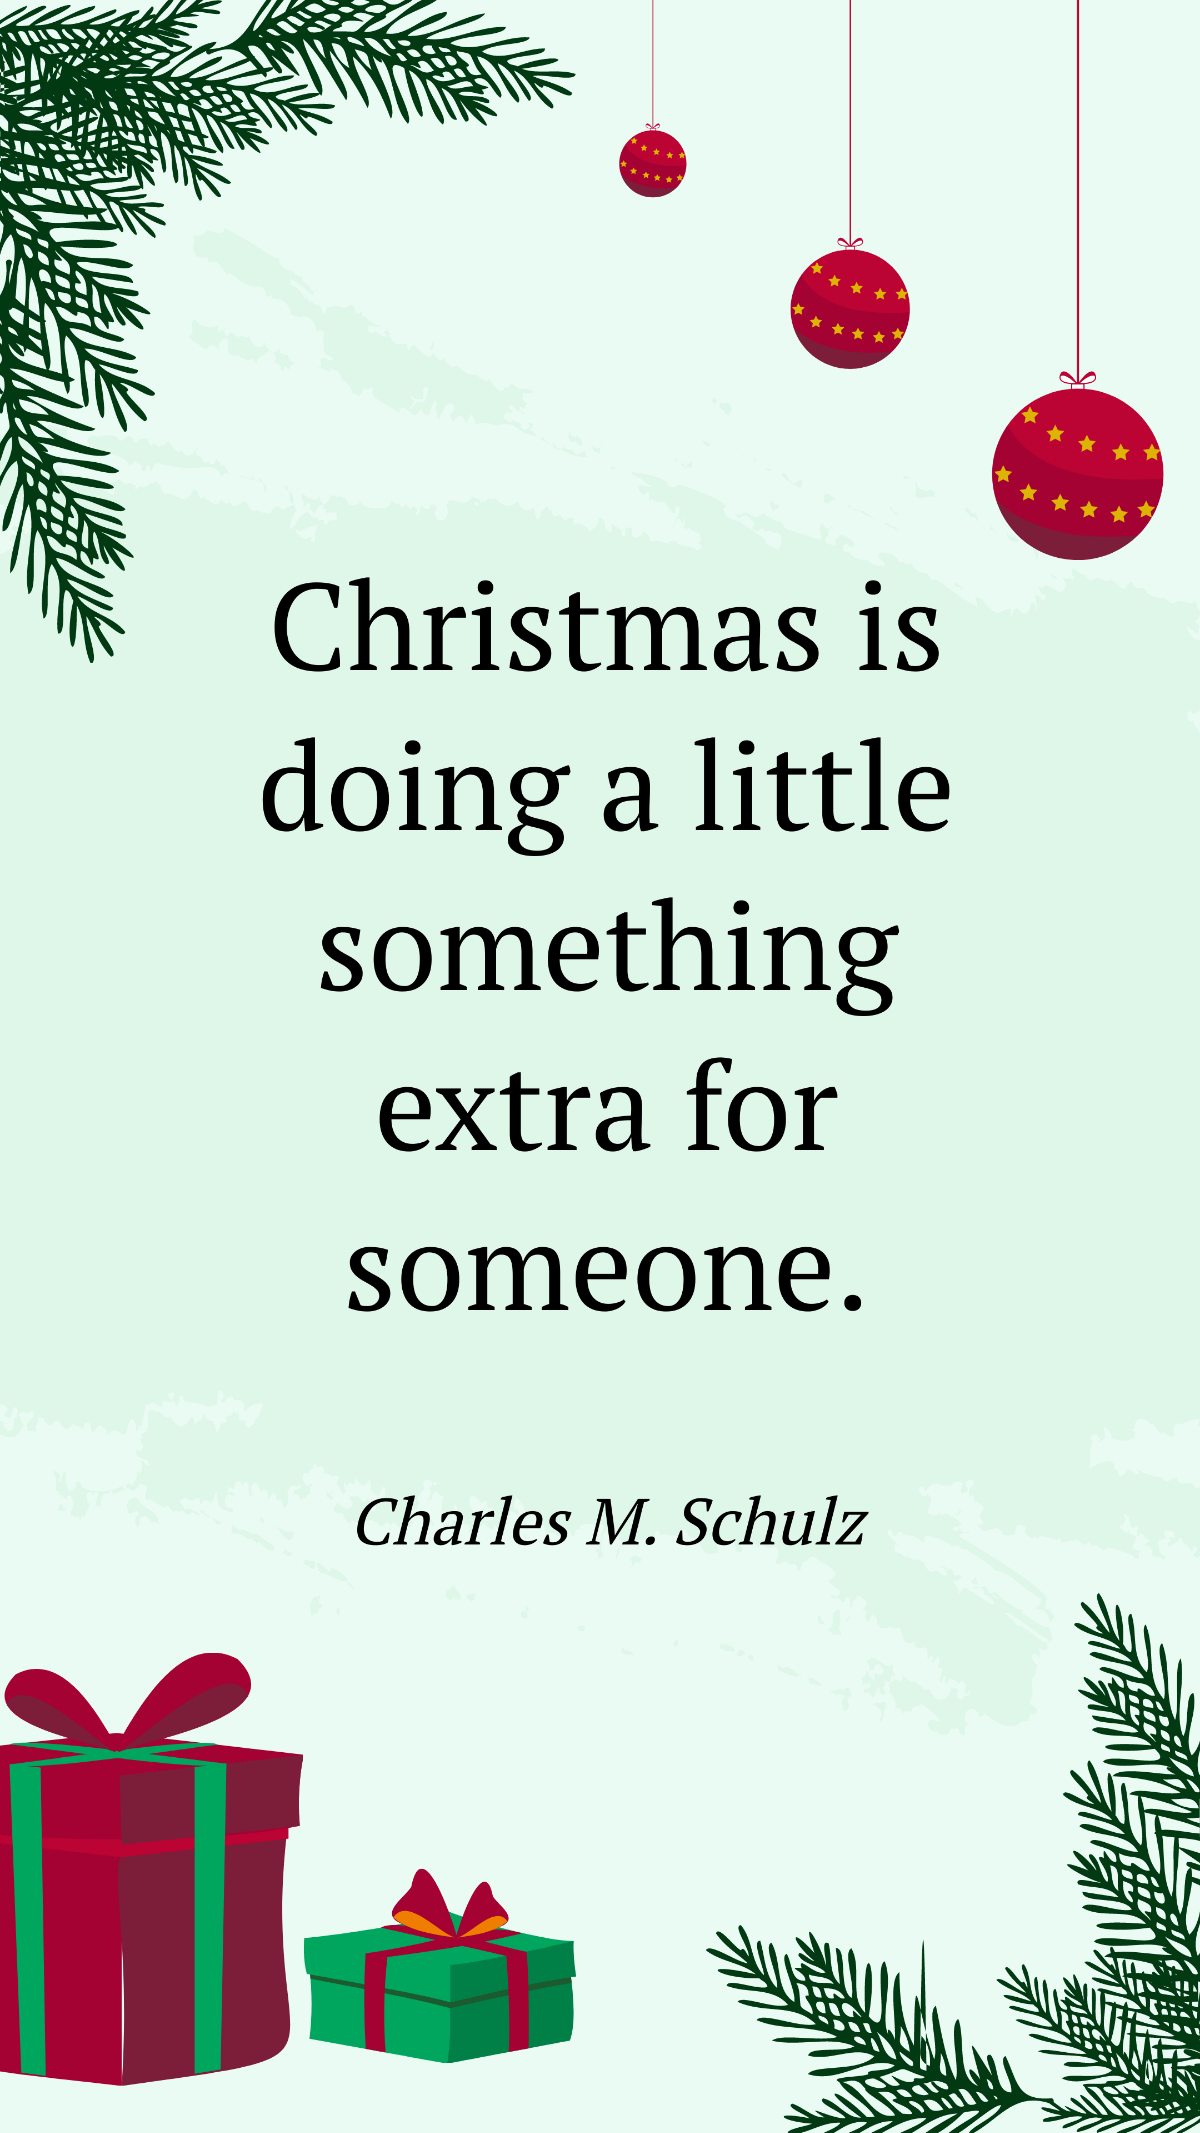 Charles M. Schulz - Christmas is doing a little something extra for someone.  Template